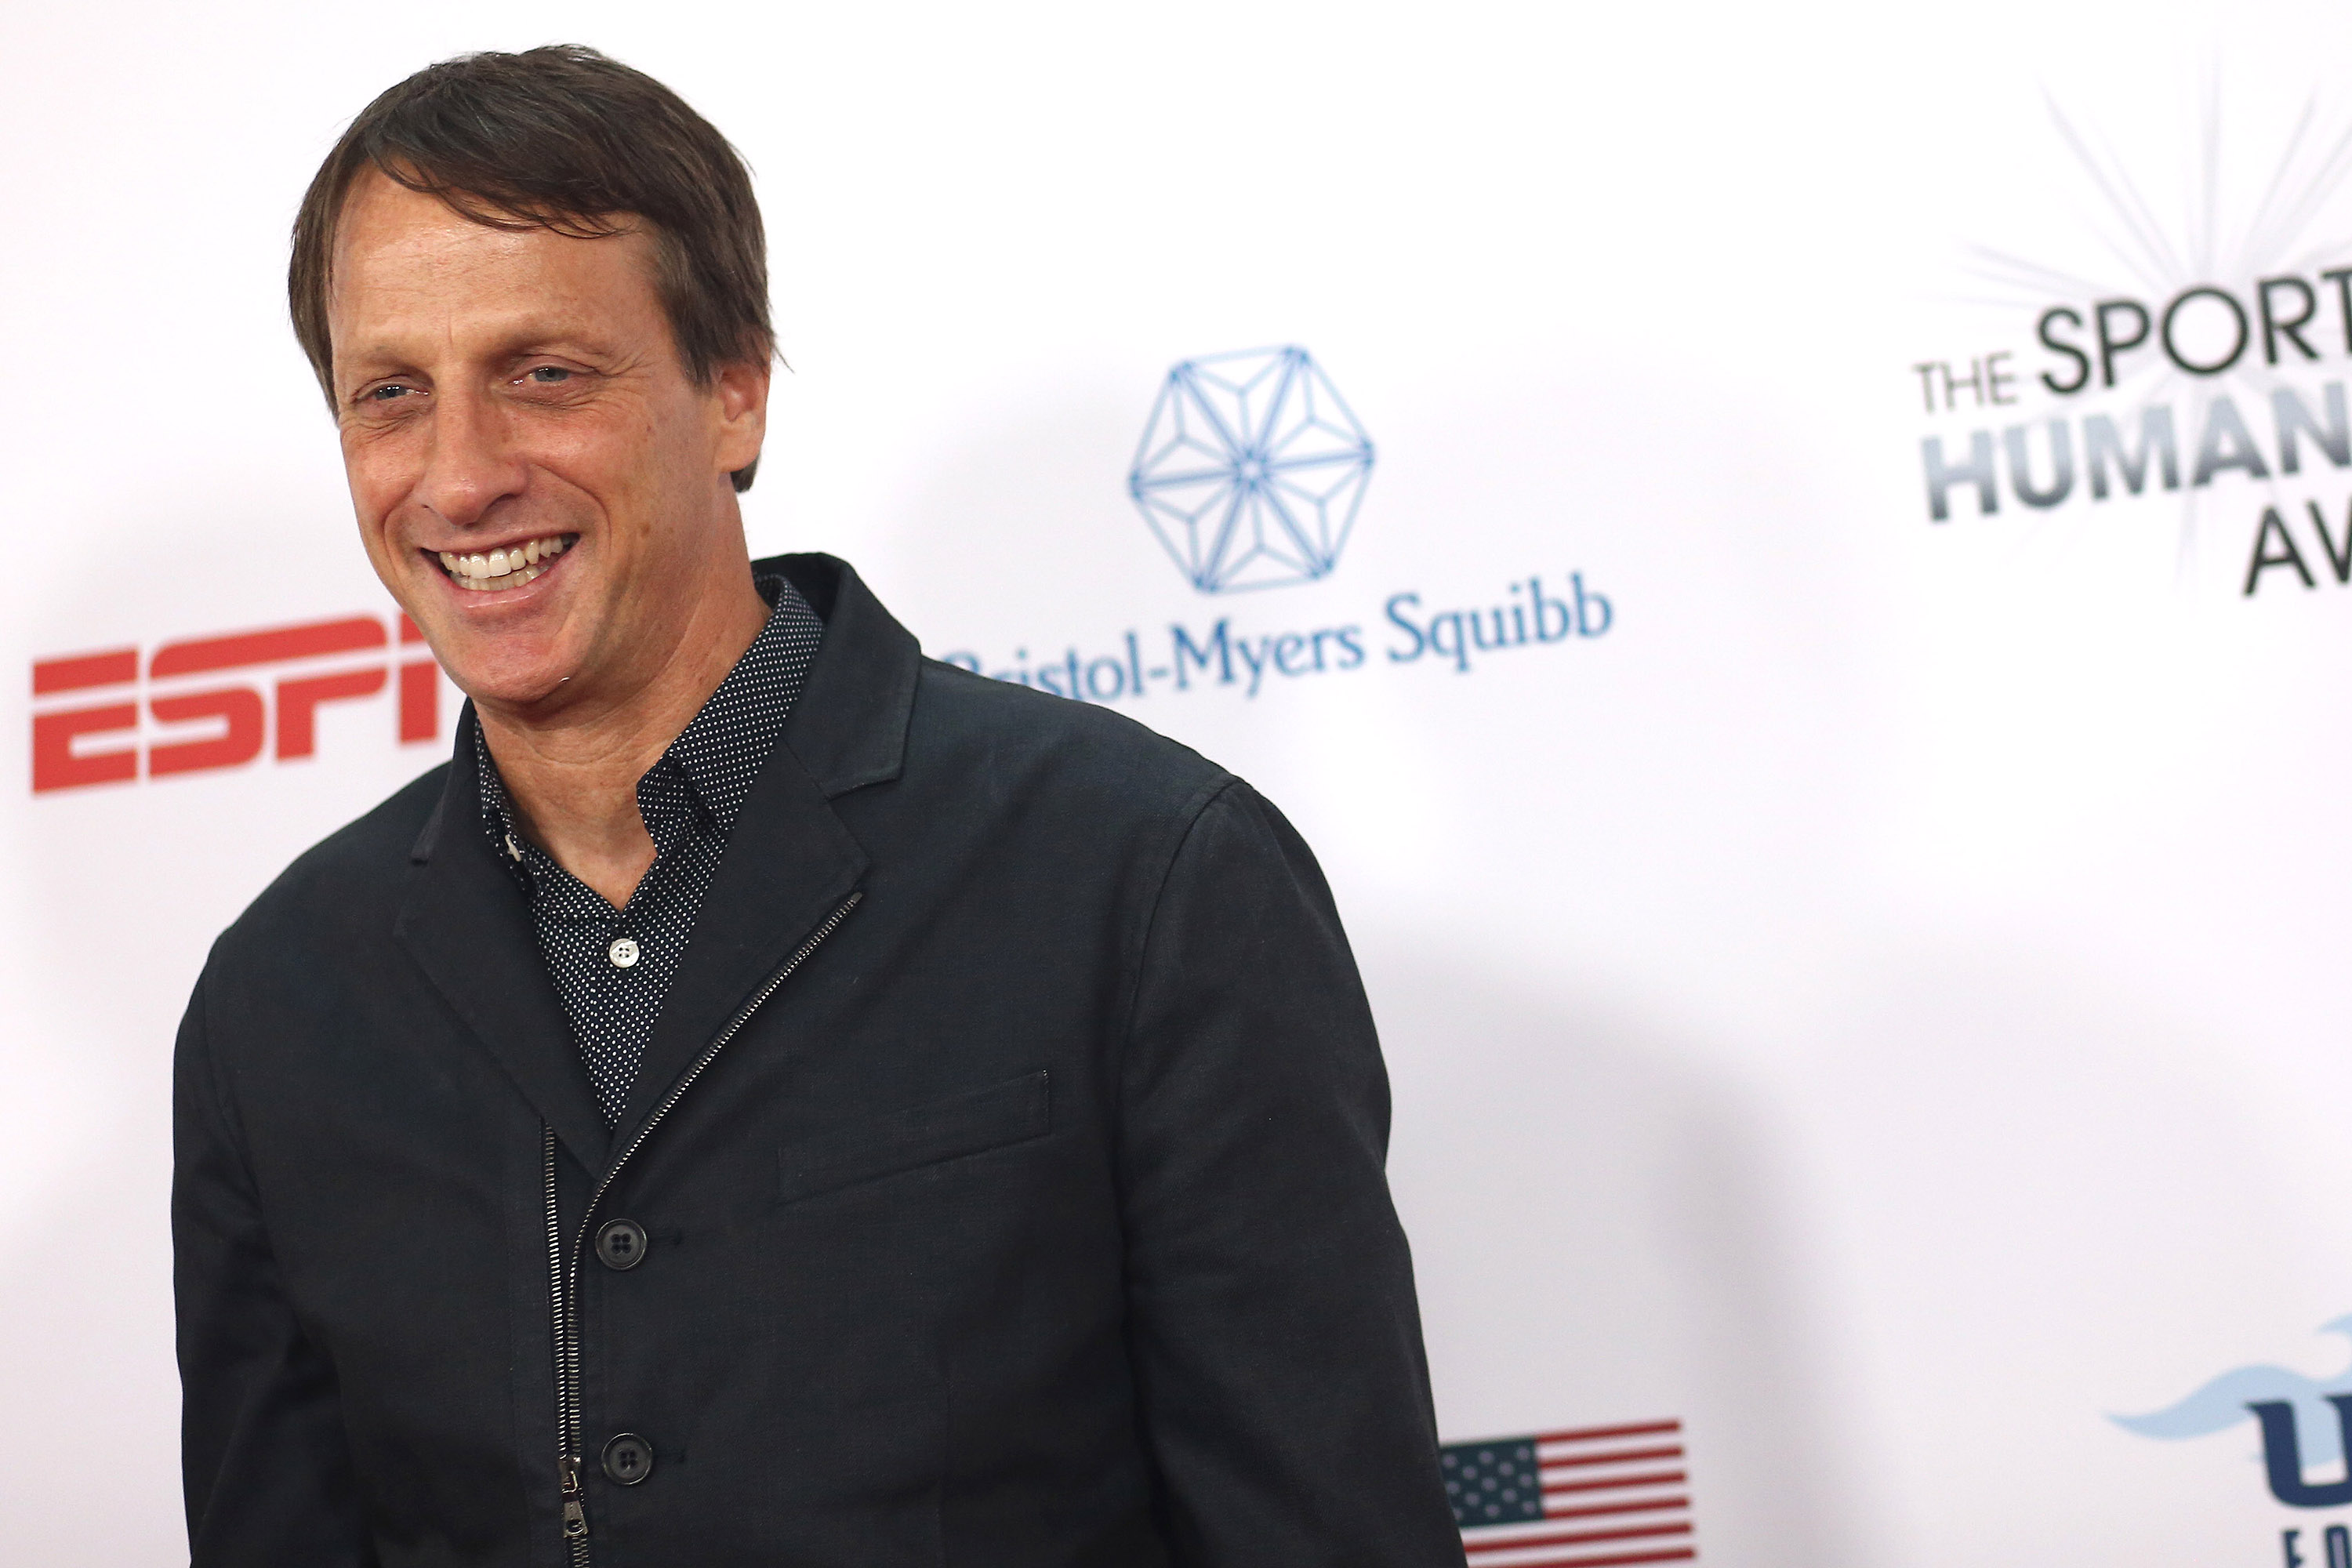 Tony Hawk Reveals The Most Cherished Moment Of His Four-Decade Long